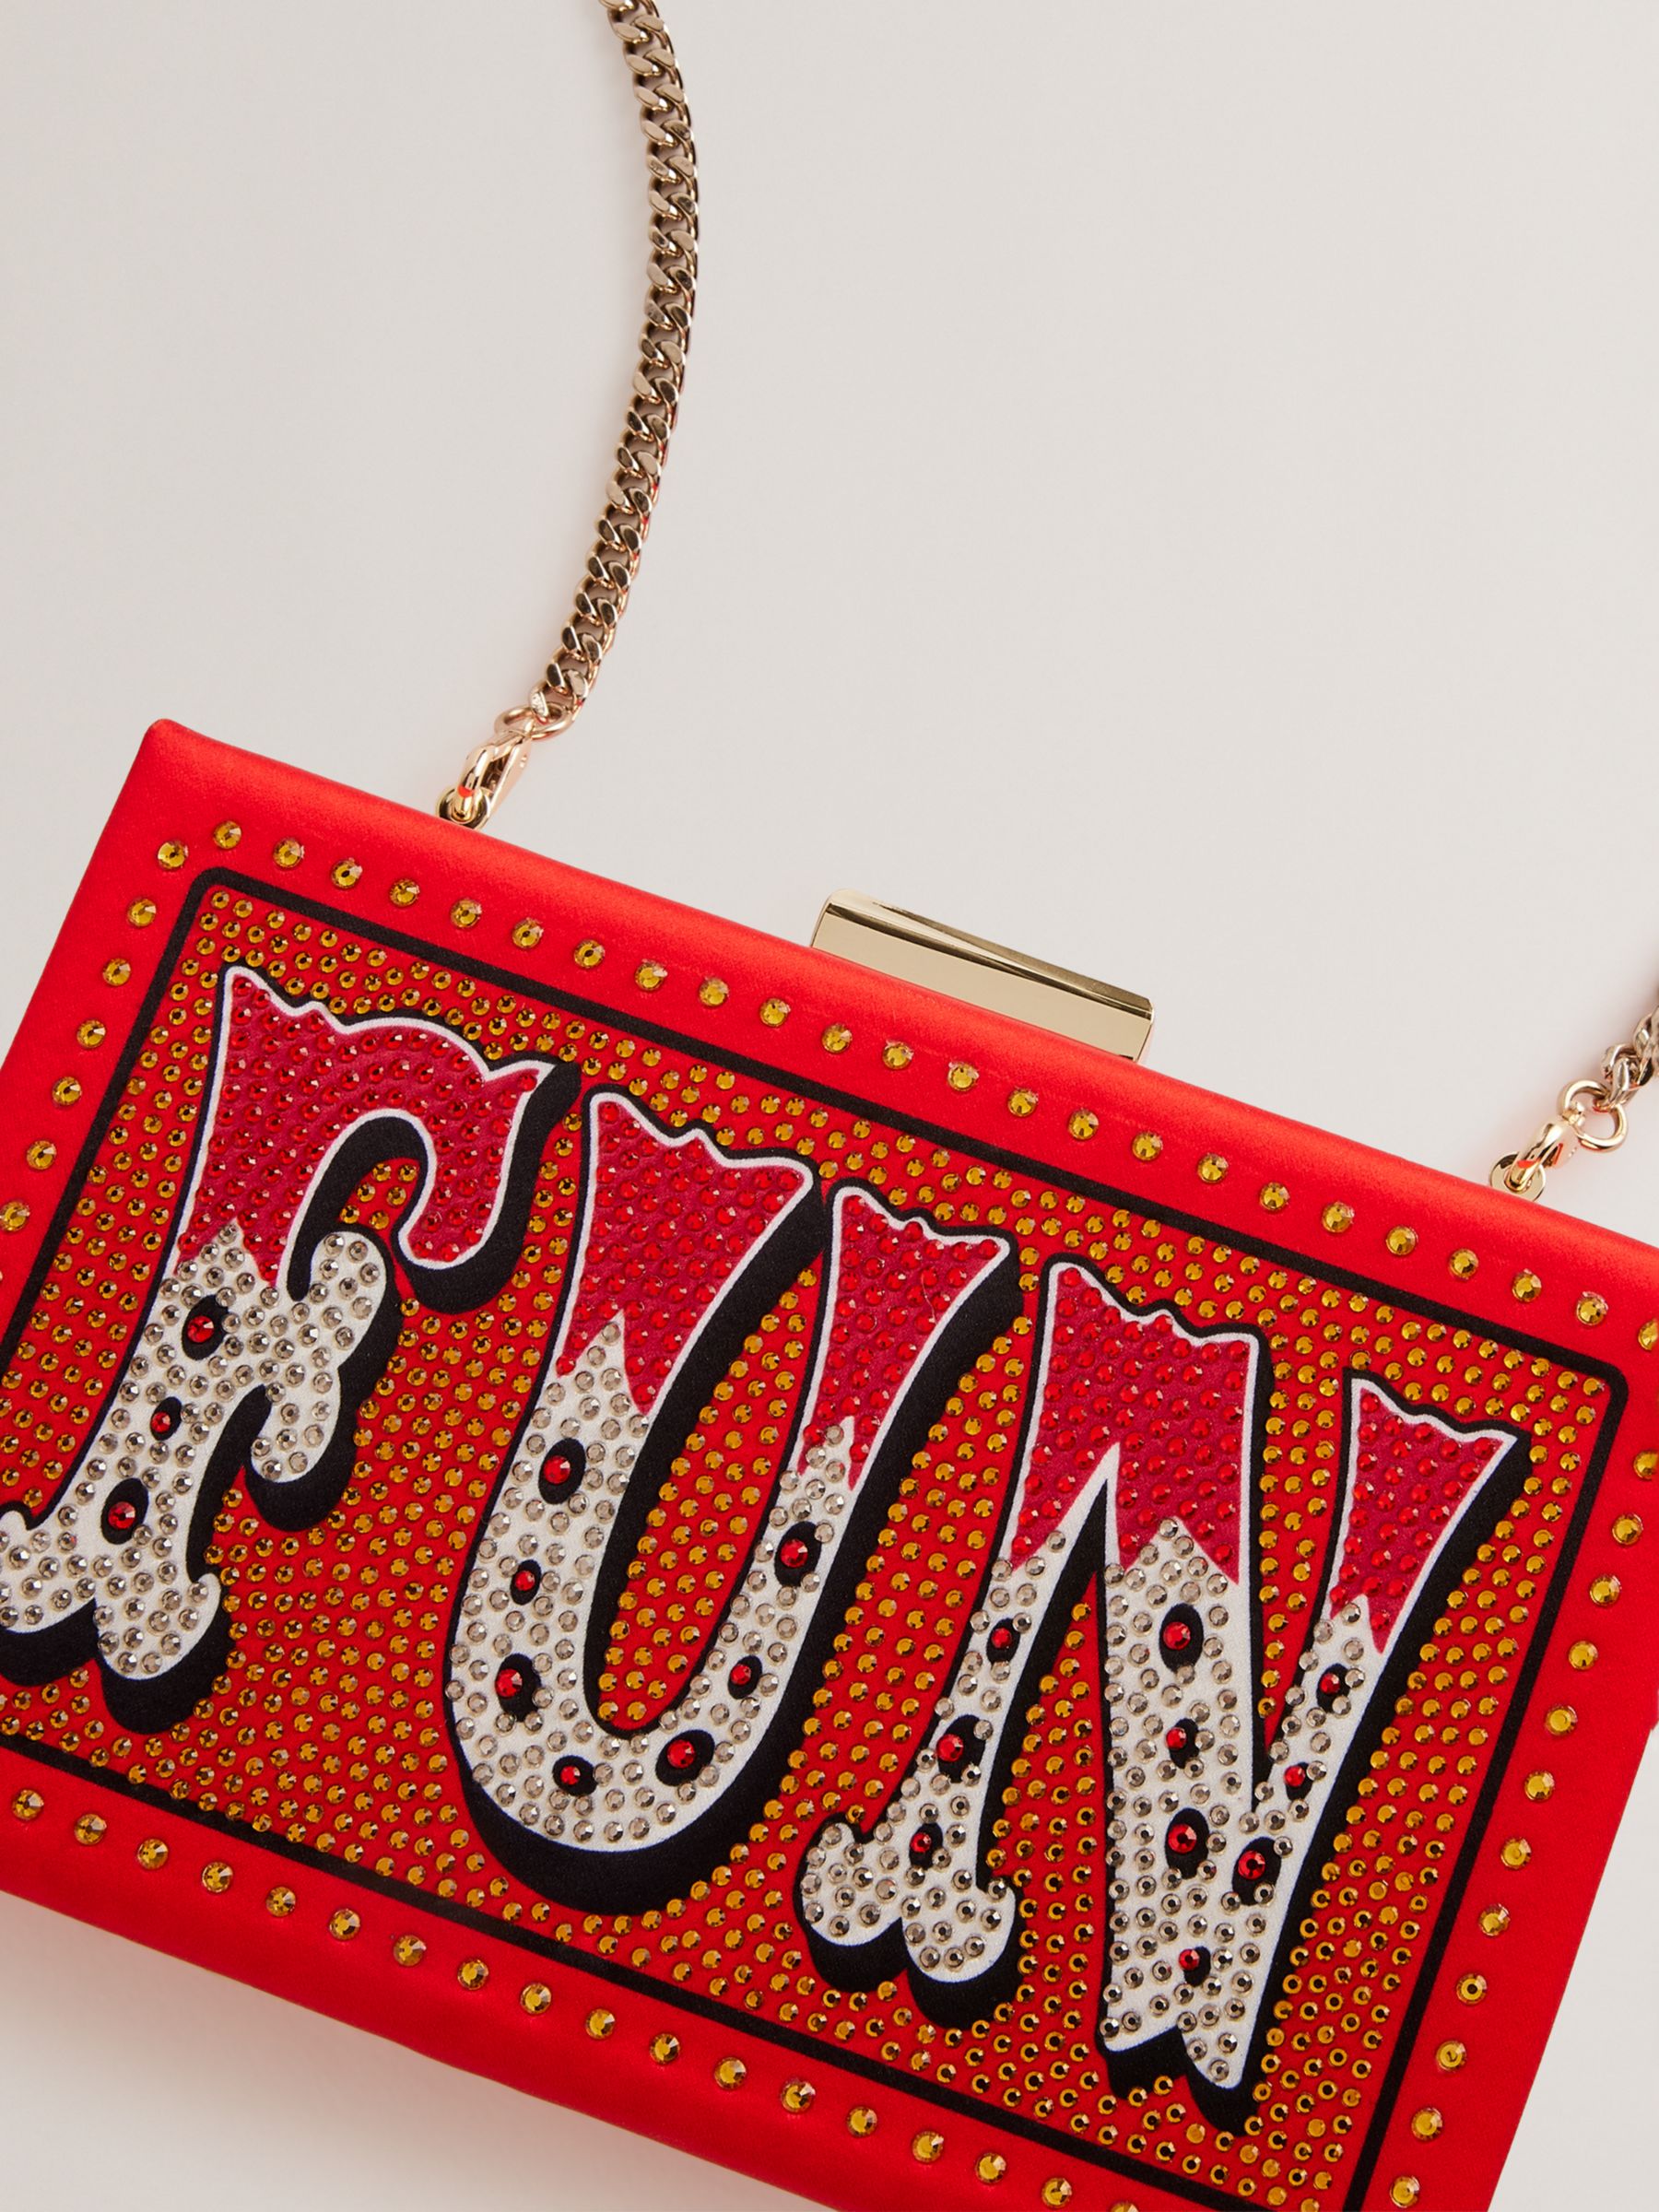 Ted Baker Funia Fun Slogan Embellished Box Clutch Bag, Red, One Size